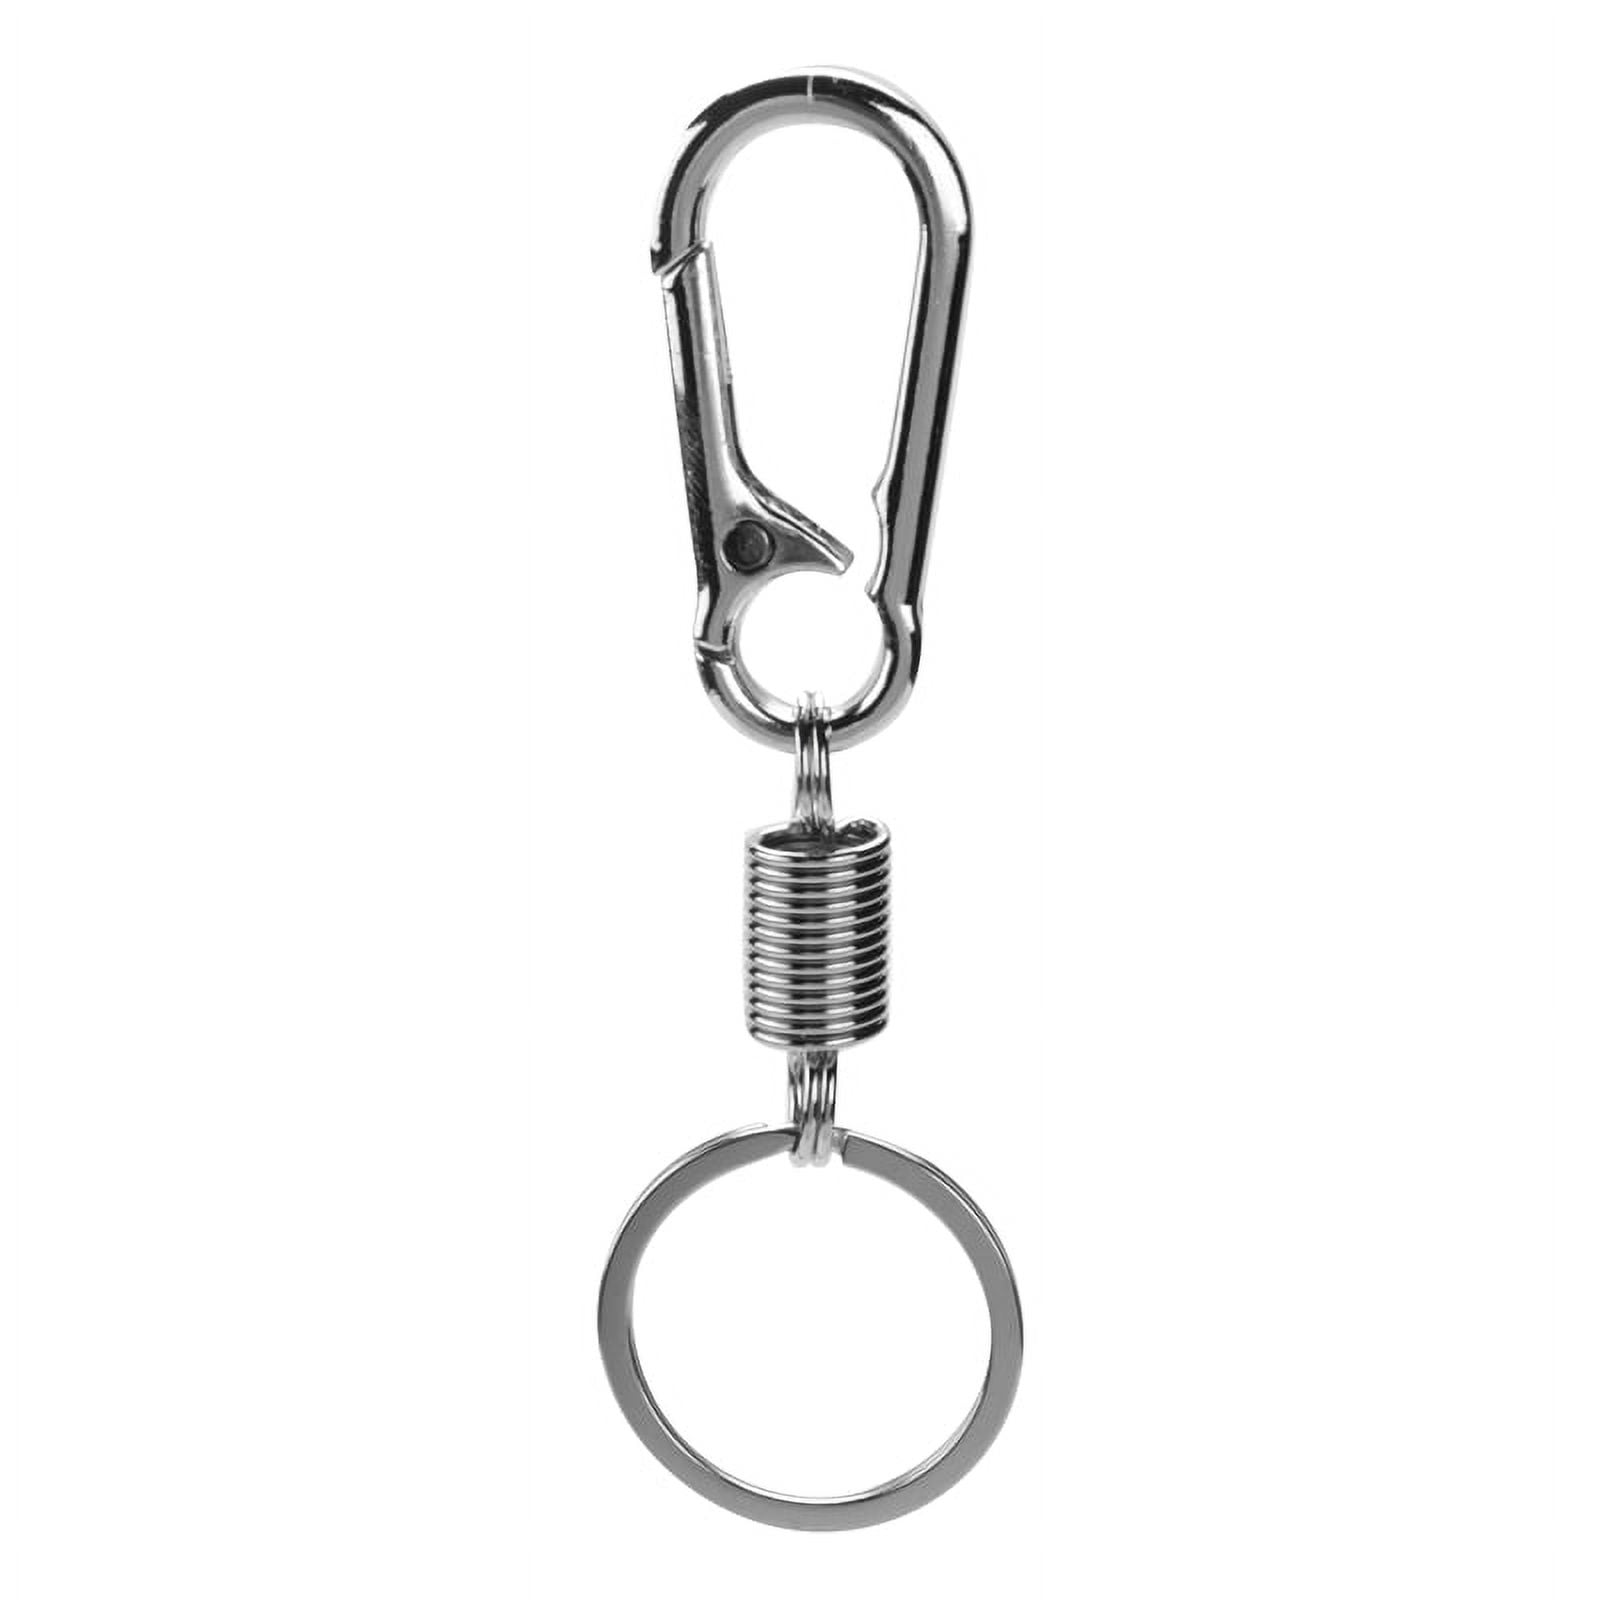 KeyUnity Titanium Carabiner Keychain Clip, Dual-Gate Quick Release Key Chain Clip Hook with Key Ring Connector for Men Women Km09, Men's, Size